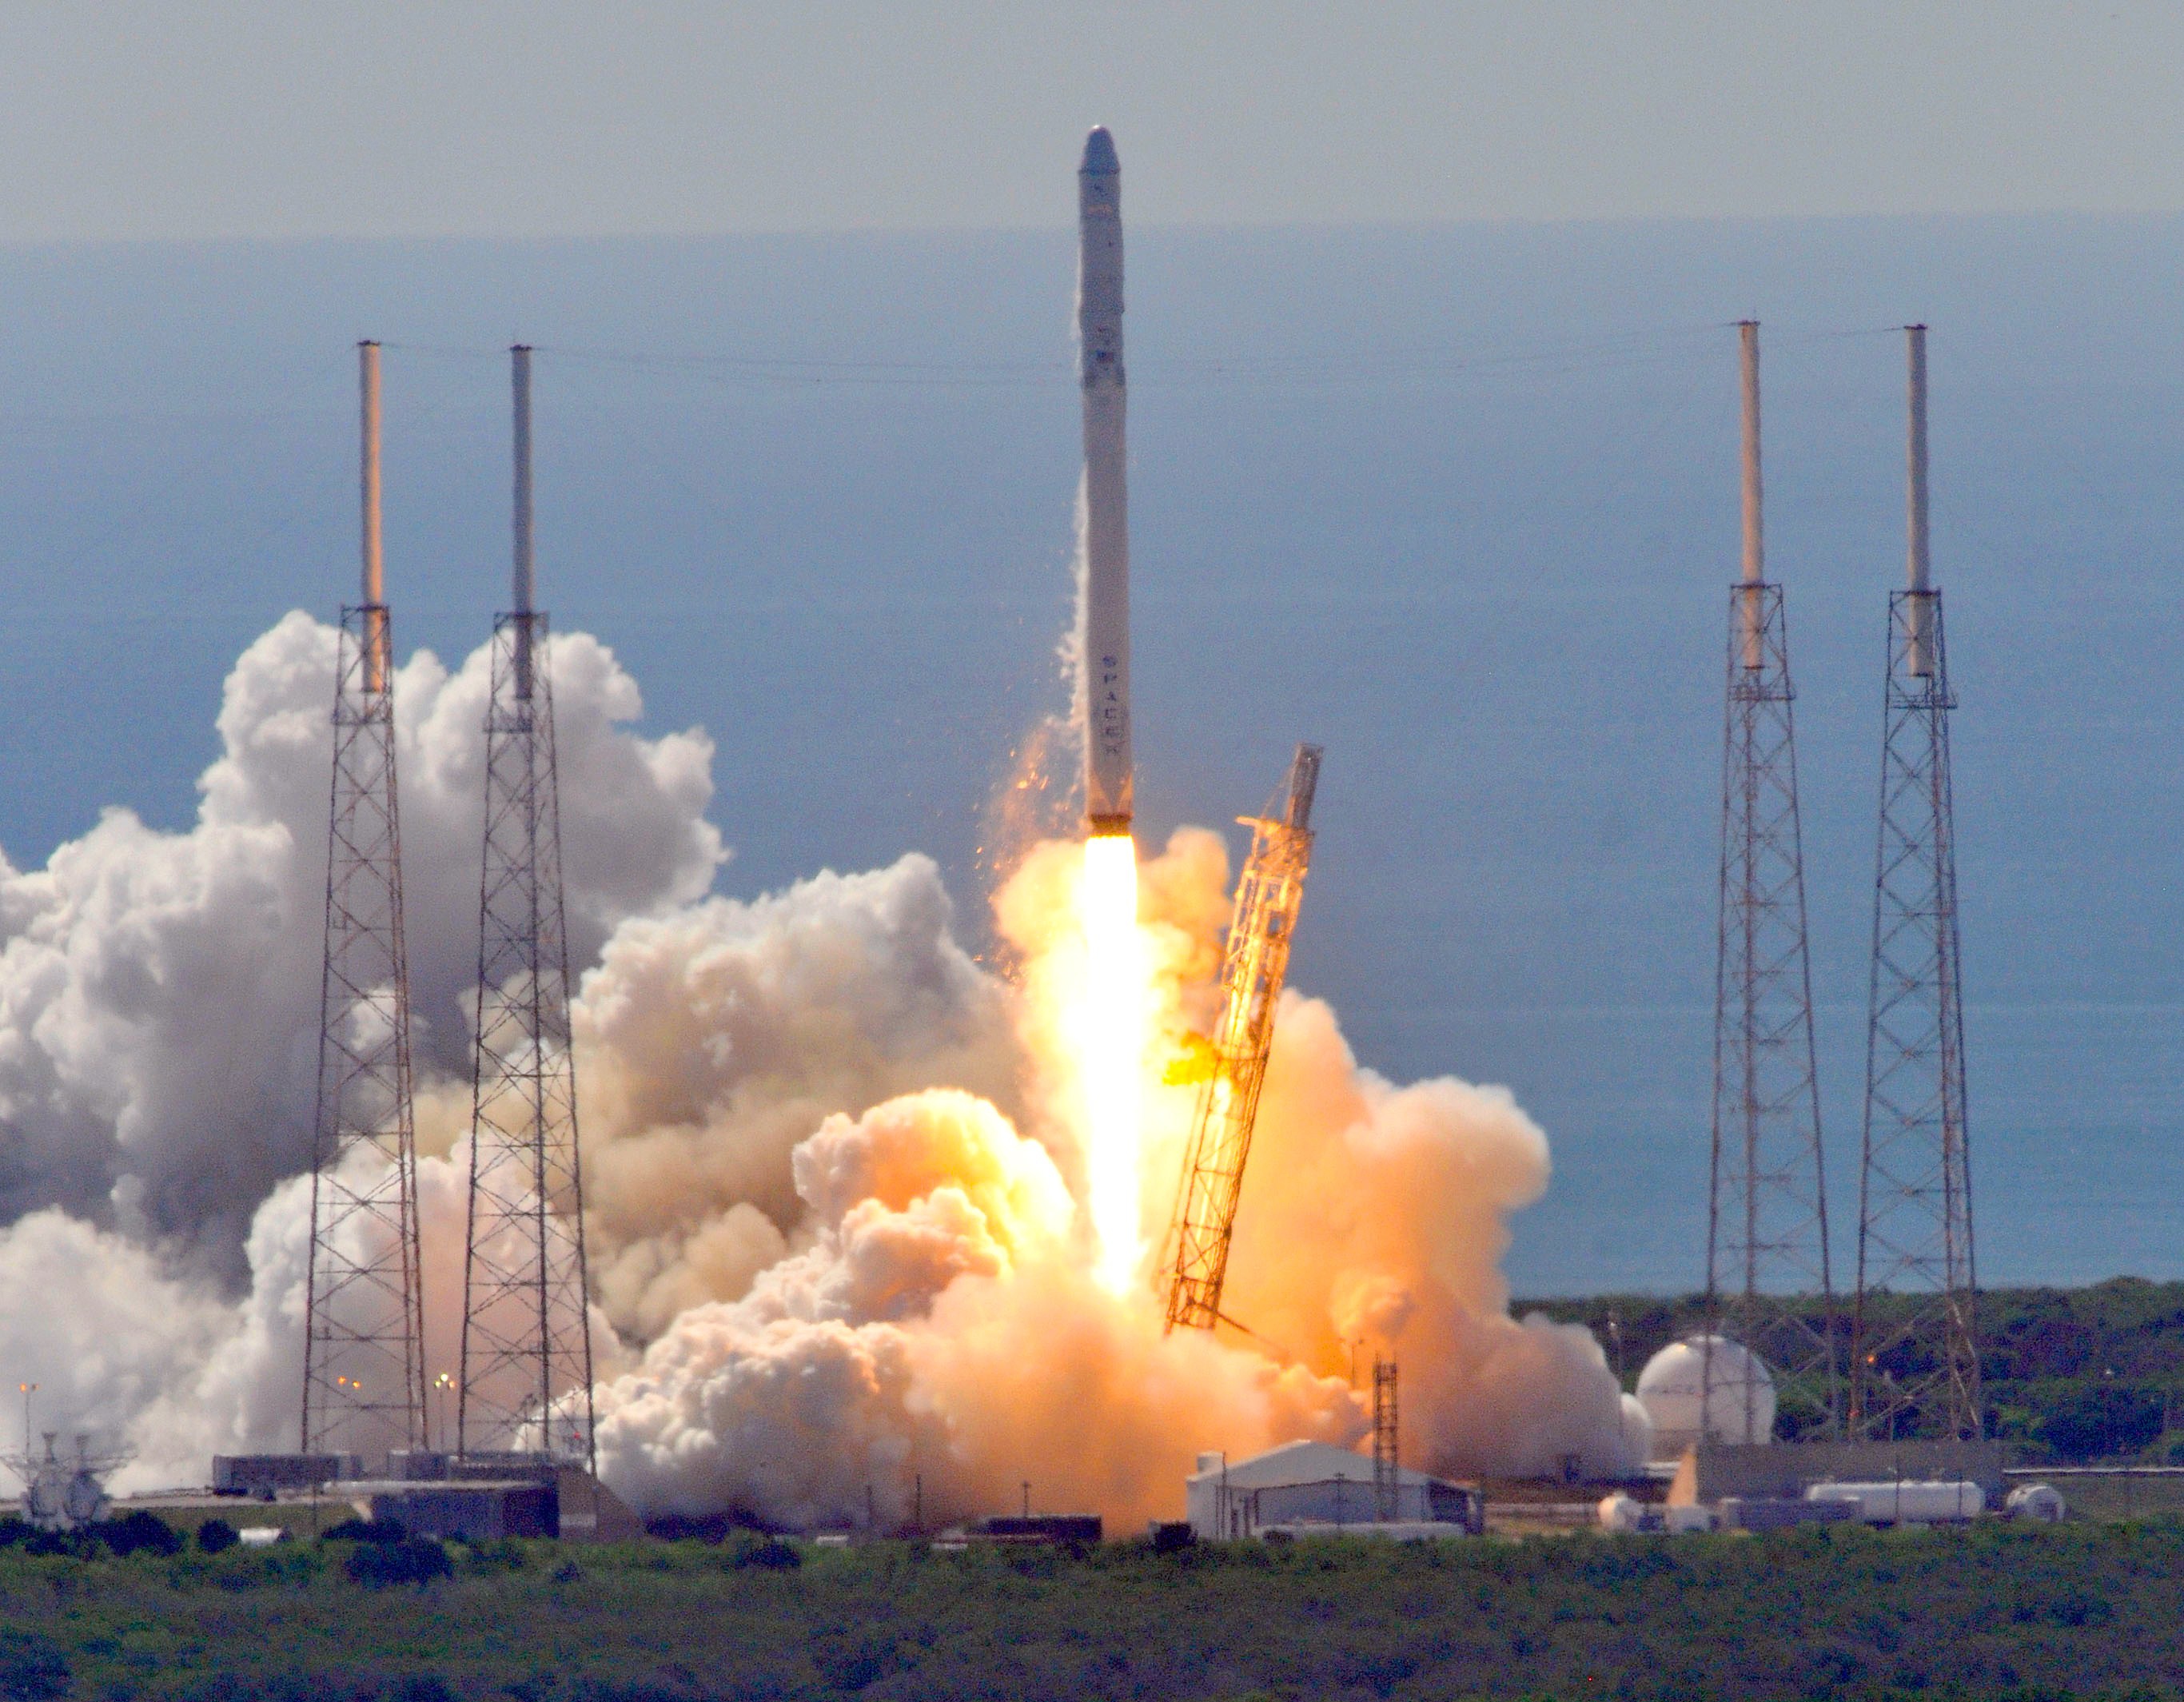 Space X's Falcon 9 rocket as it lifts off from space launch complex 40 at Cape Canaveral, Florida June 28, 2015 with a Dragon CRS7 spacecraft. (BRUCE WEAVER—AFP/Getty Images)